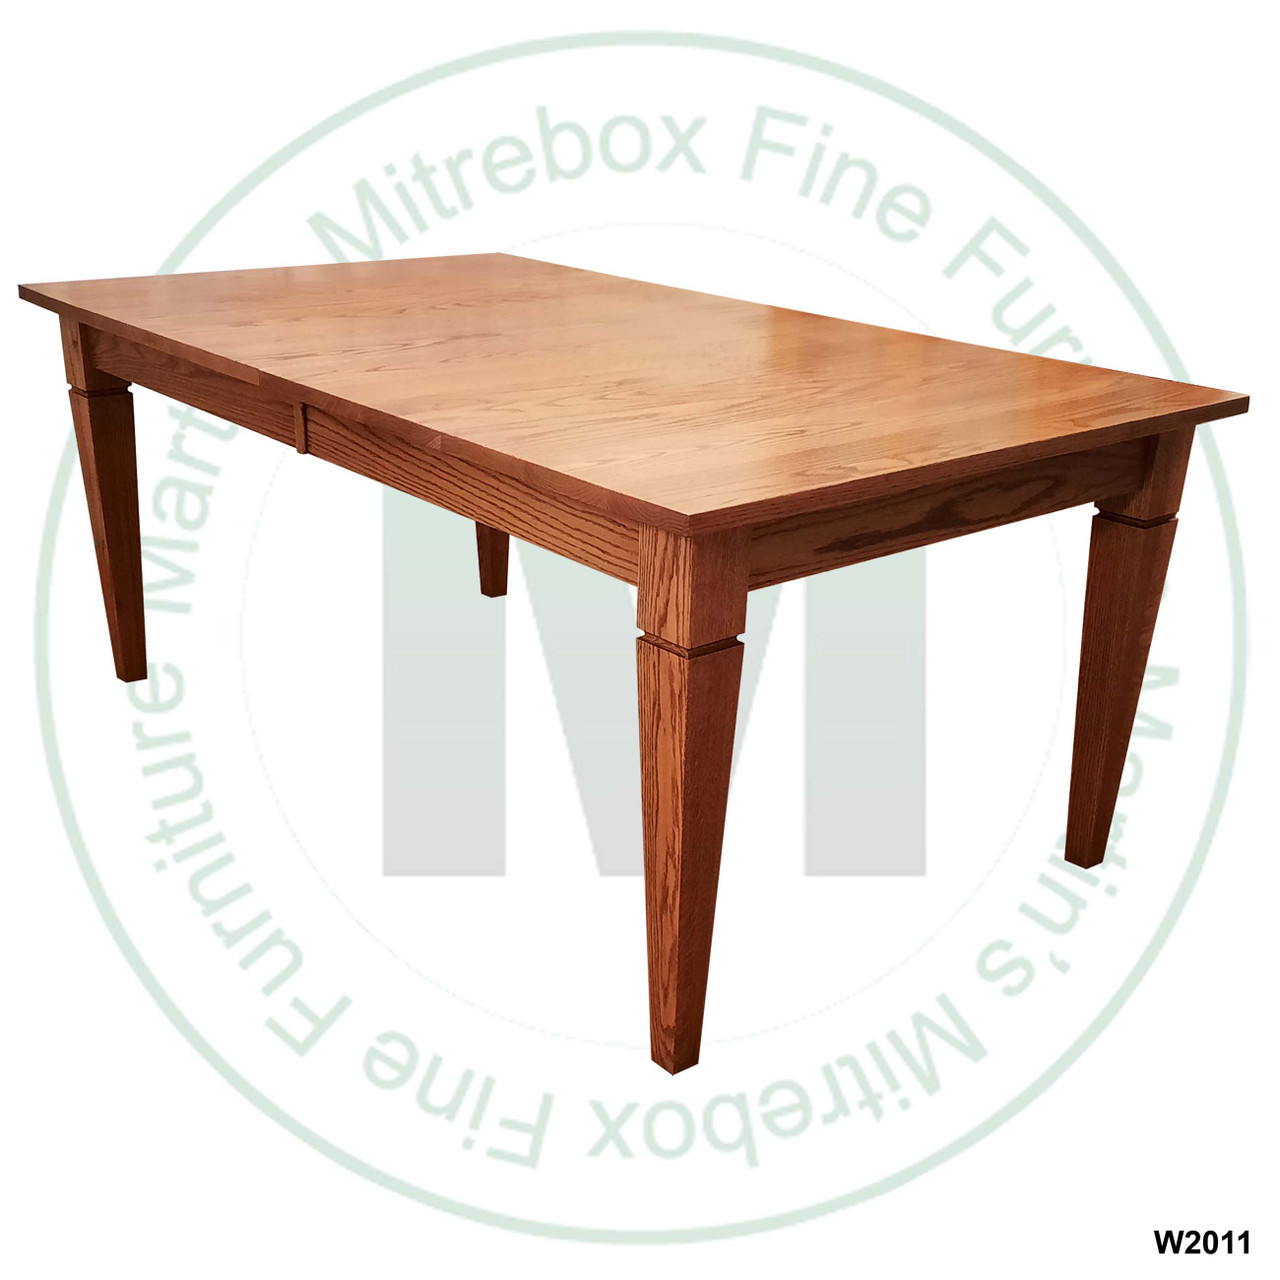 Oak Reesor Solid Top Harvest Table 42''D x 108''W x 30''H Table Has 1'' Thick Top